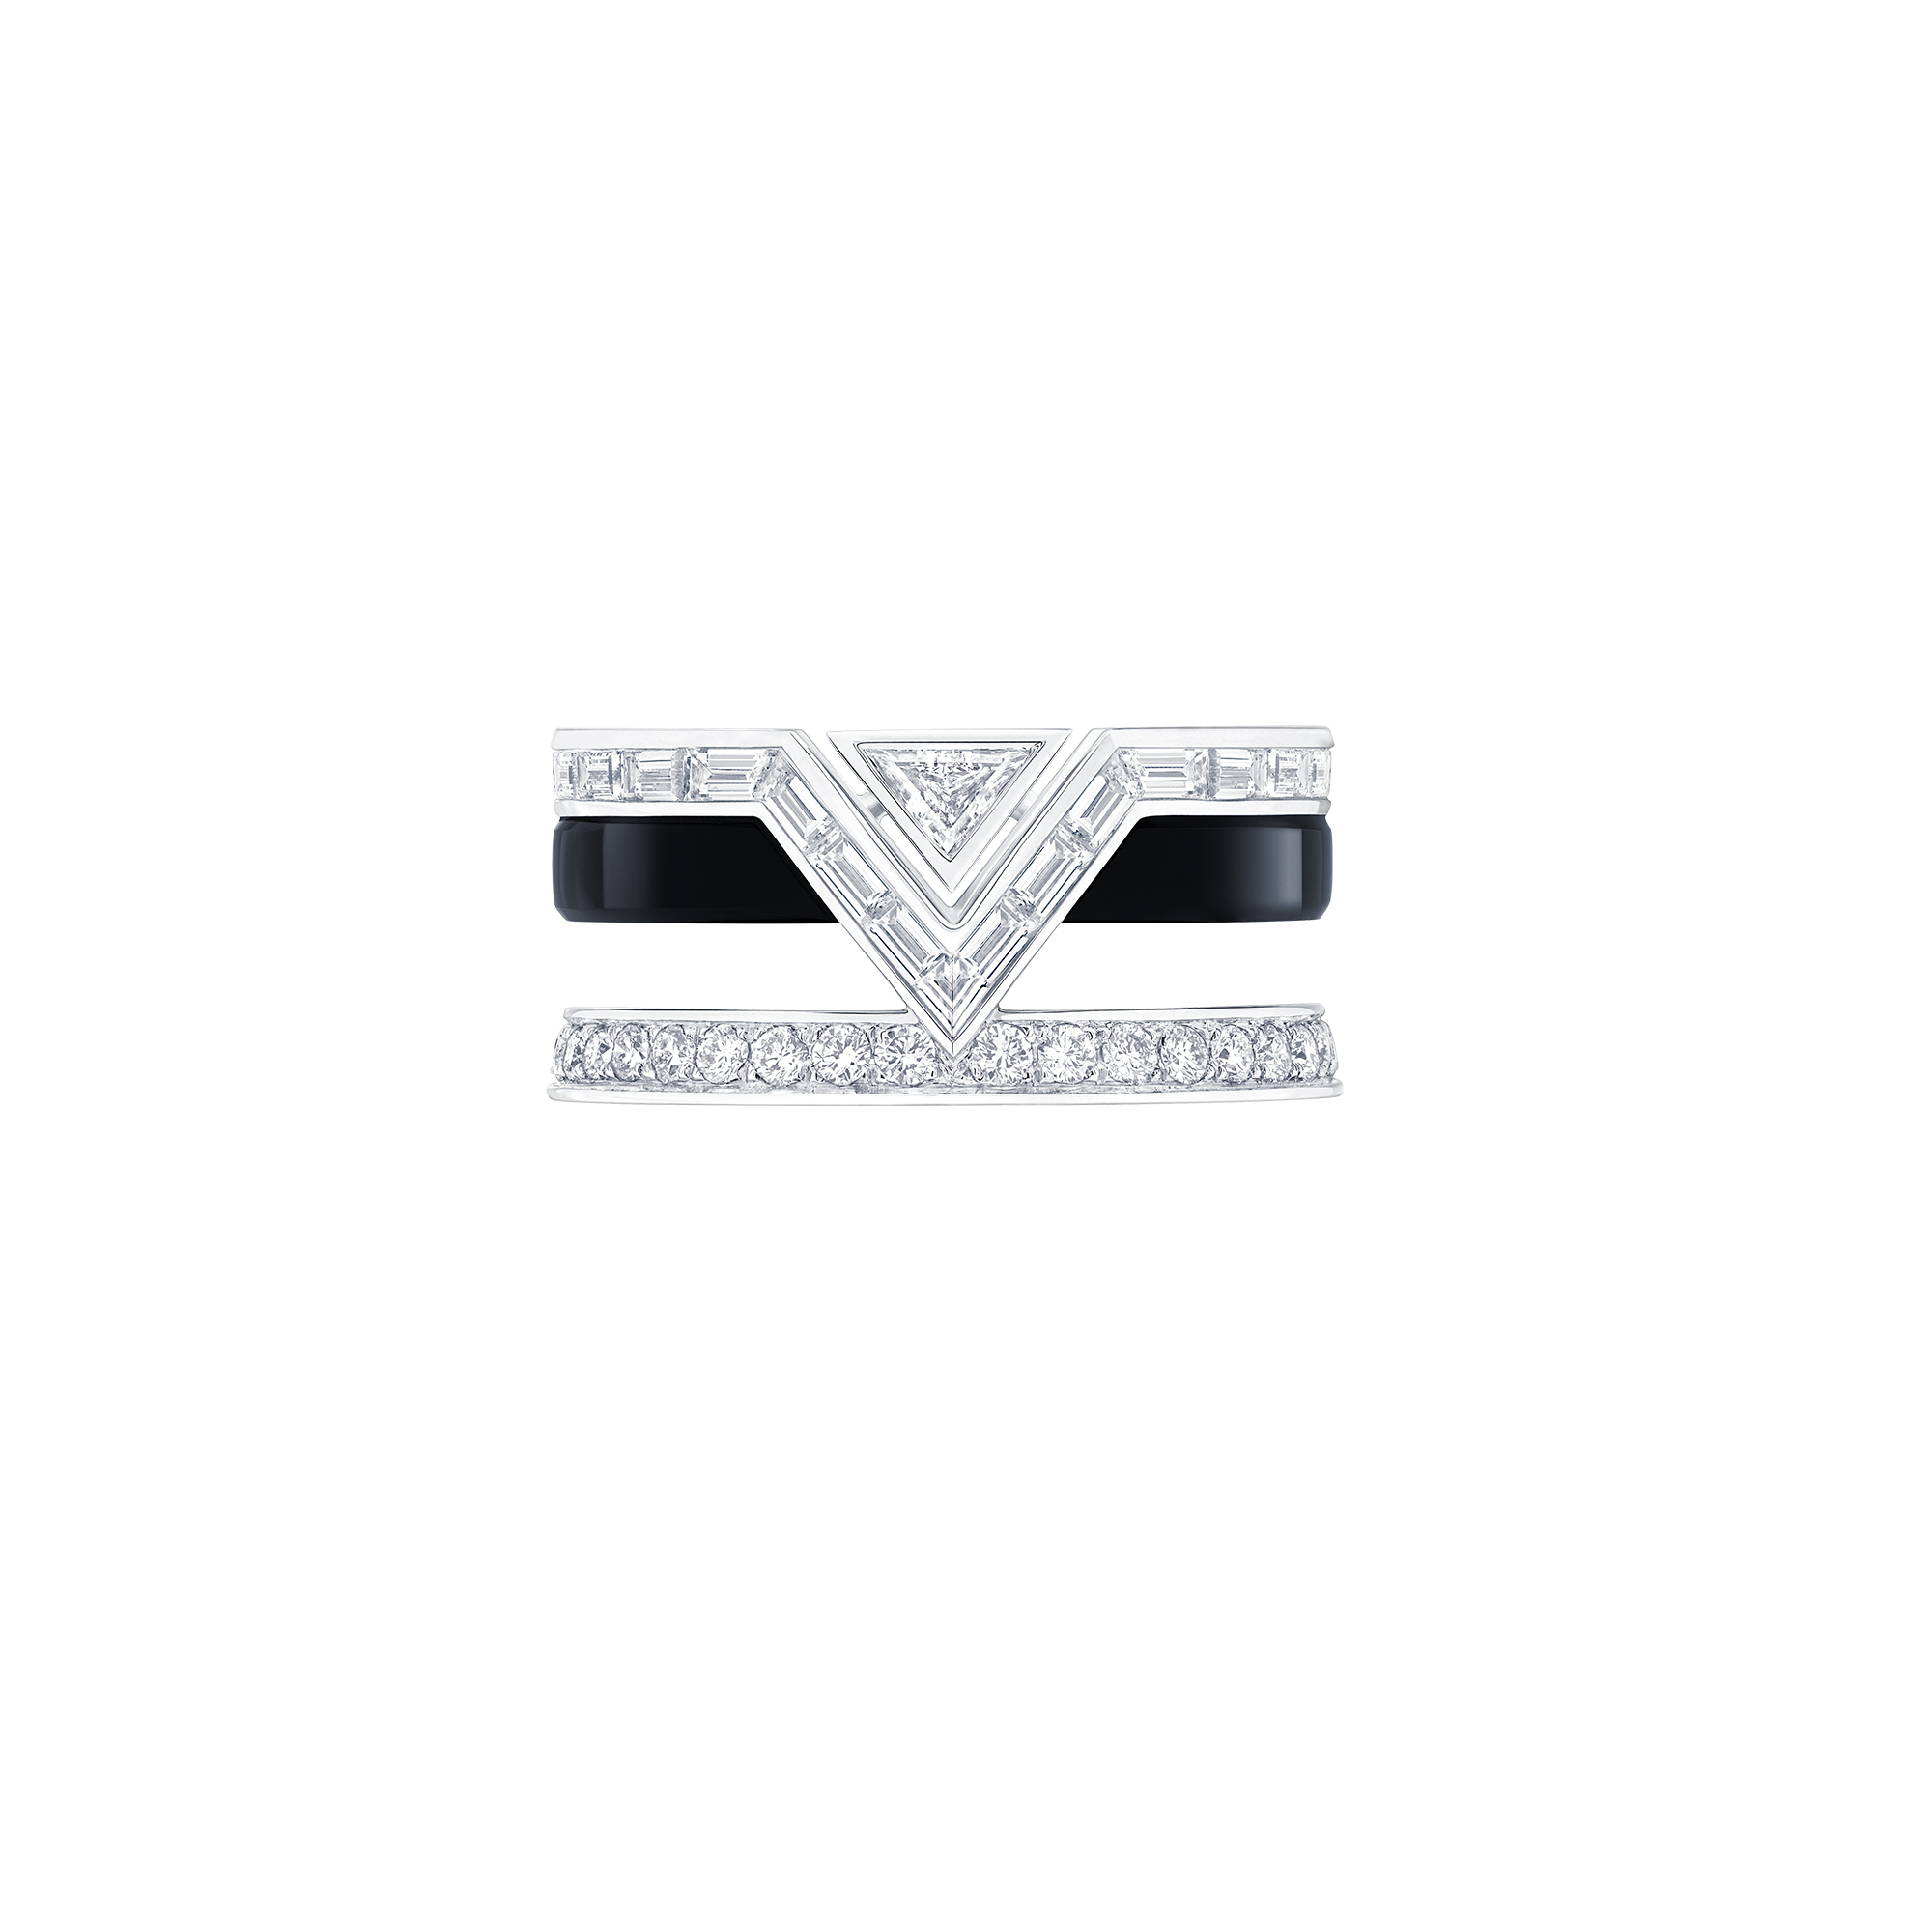 Louis Vuitton presents its Acte V high jewellery collection on the